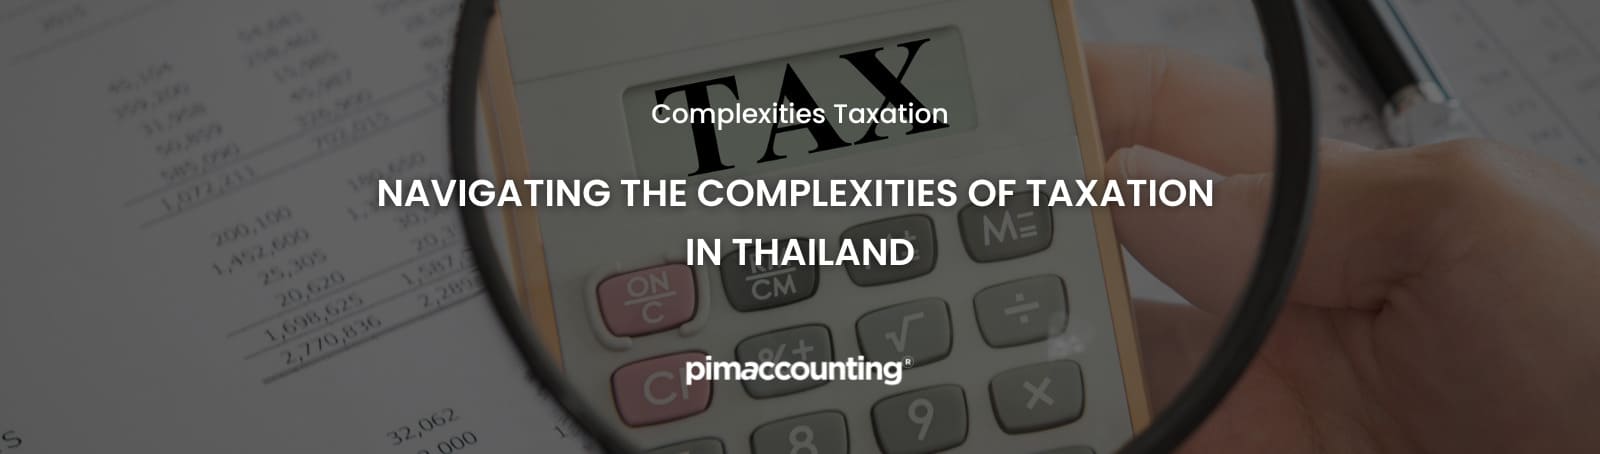 Complexities of taxation - pimaccounting